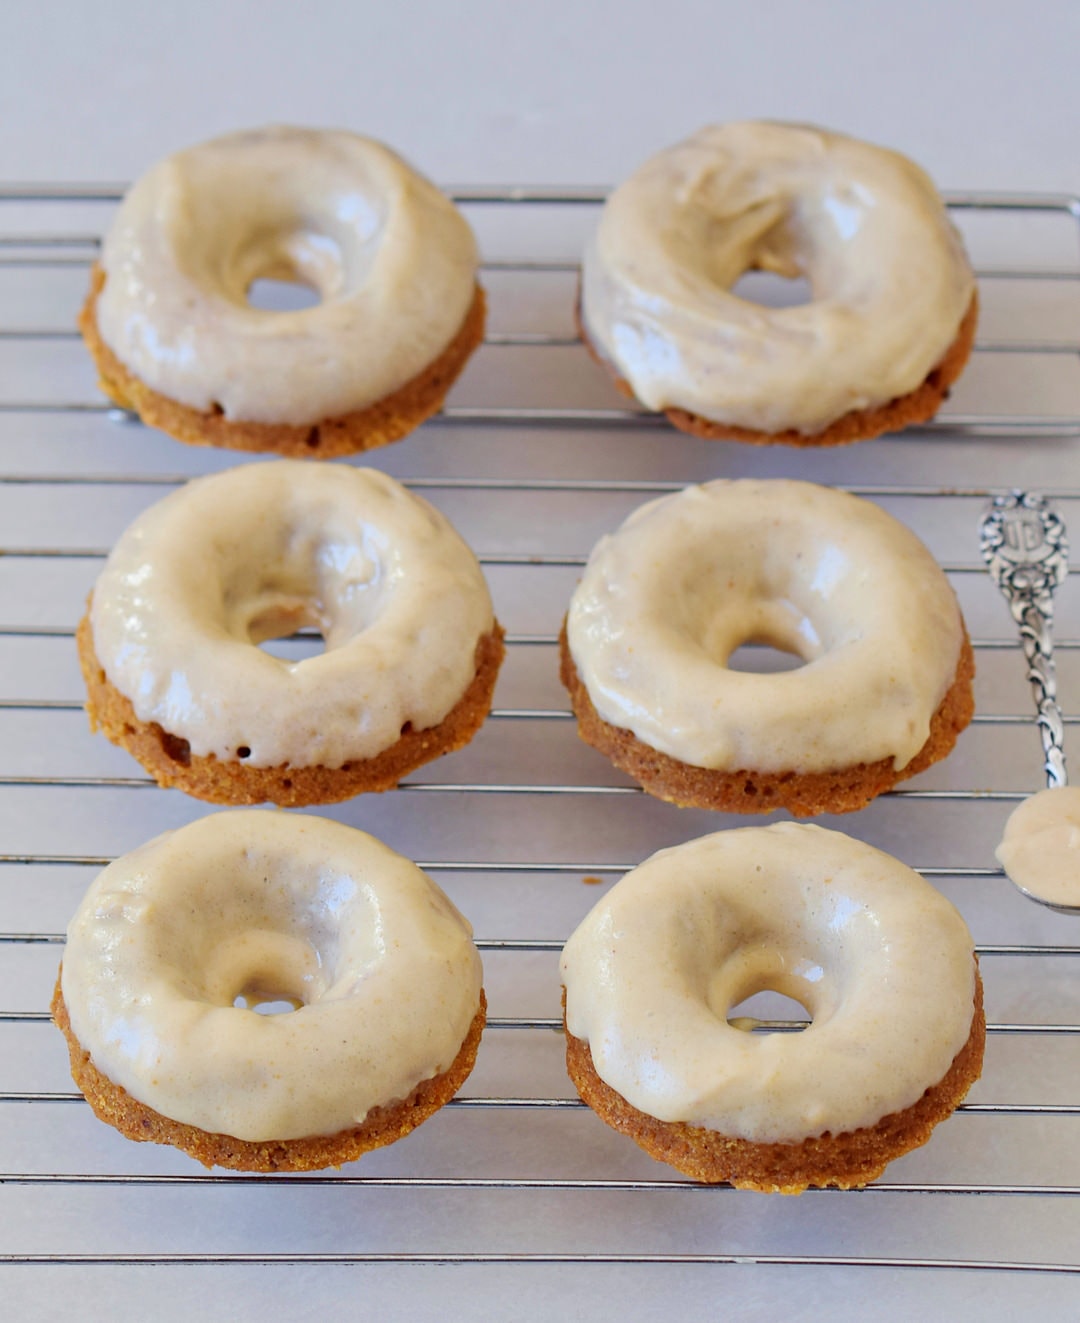 healthy vegan carrot cake donuts with gingerbread flavor and frosting on a wire rack